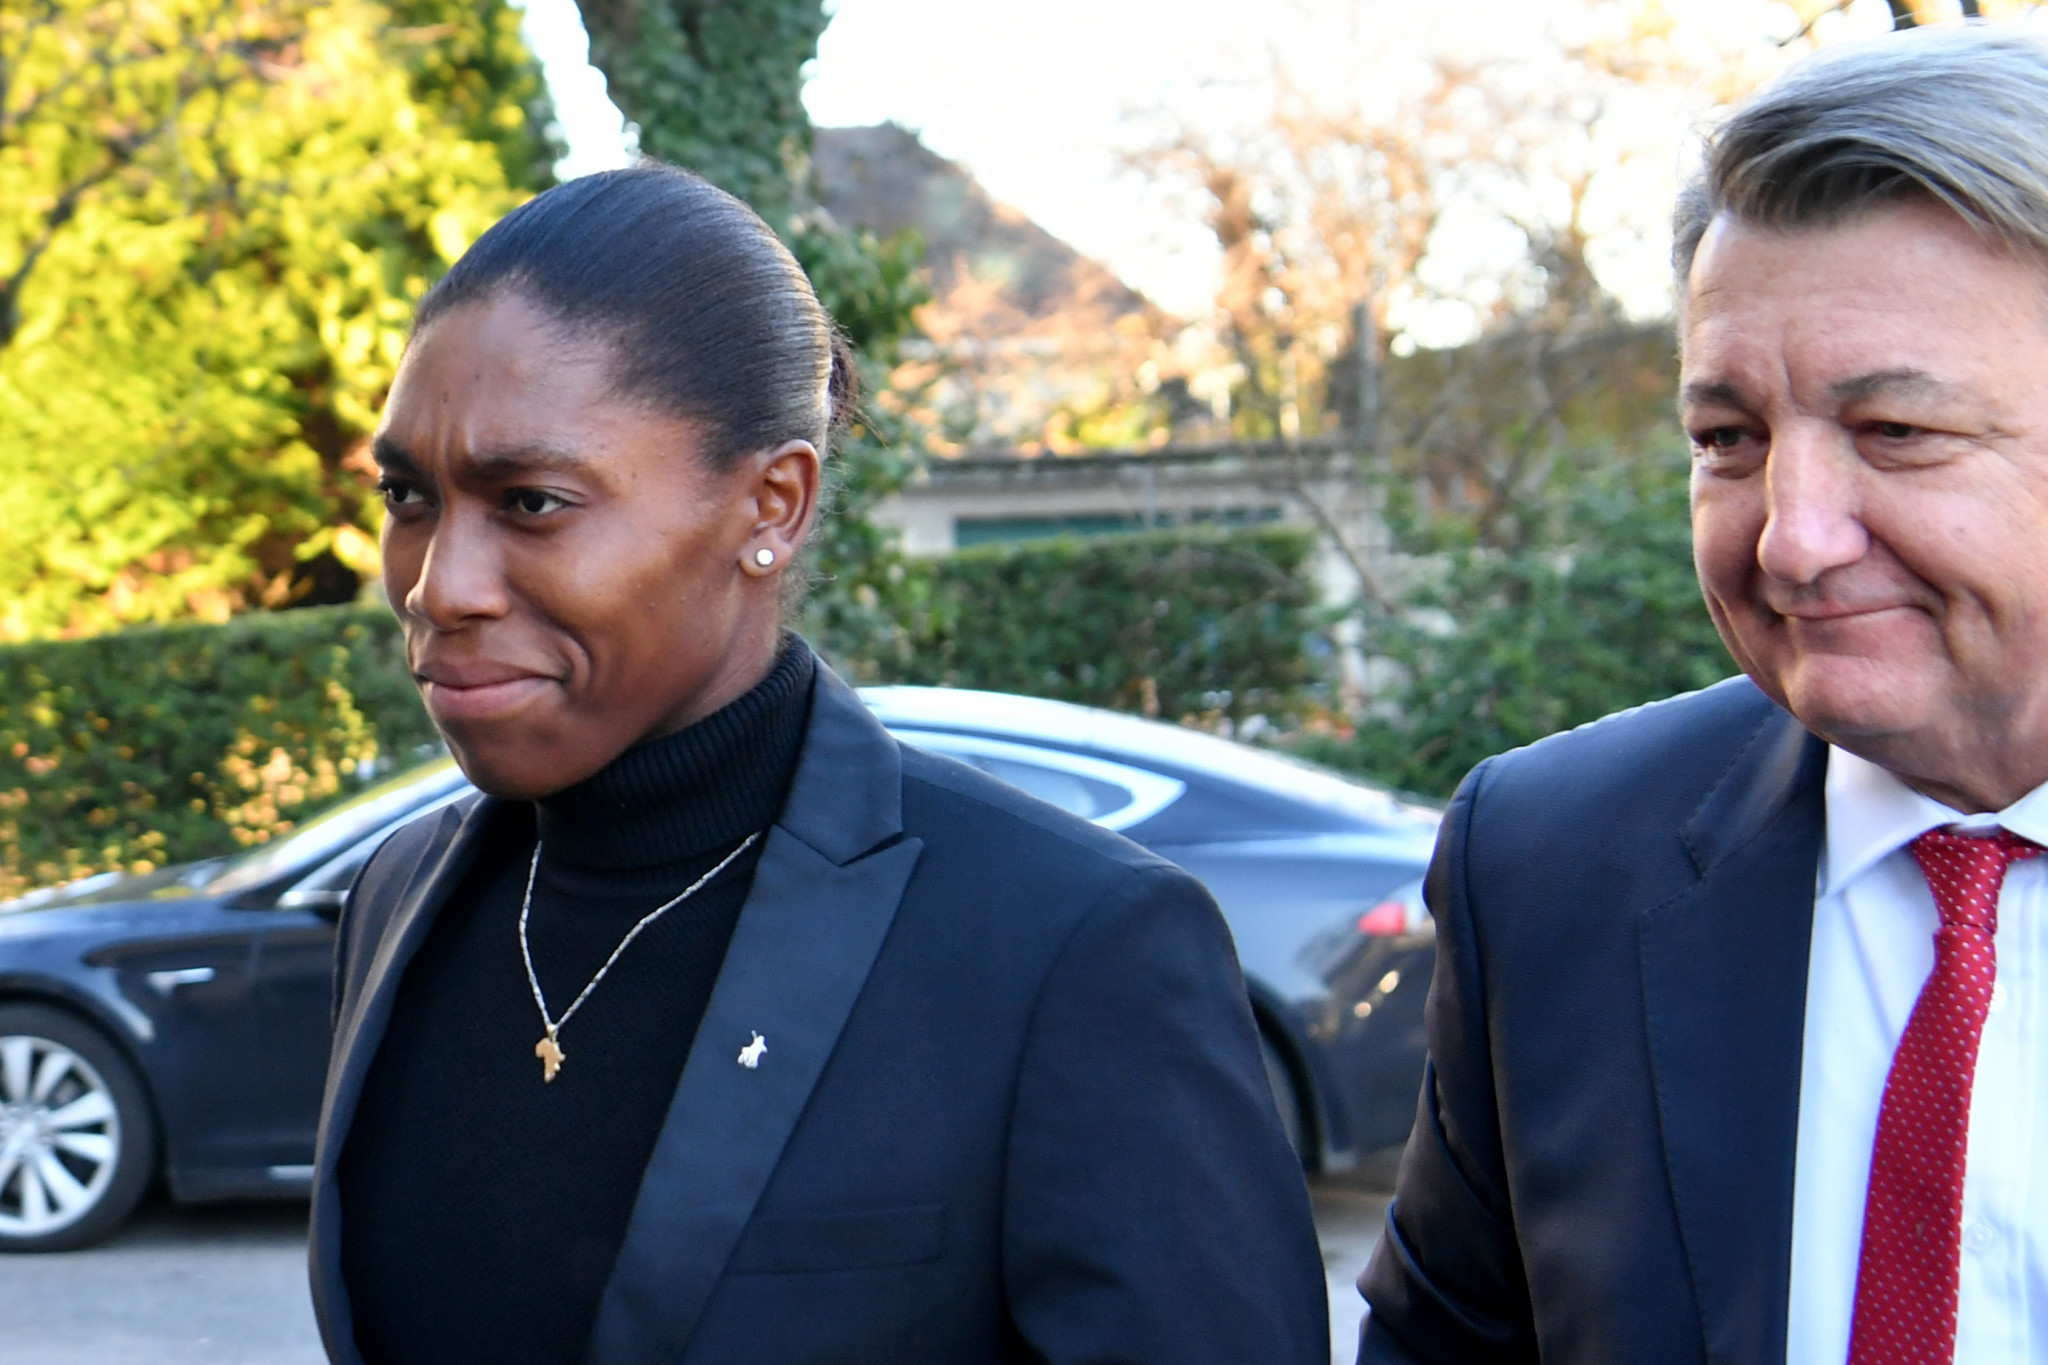 The Court of Arbitration for Sport has said a decision on the high-profile Caster Semenya case will be announced on or before March 26 ©Getty Images